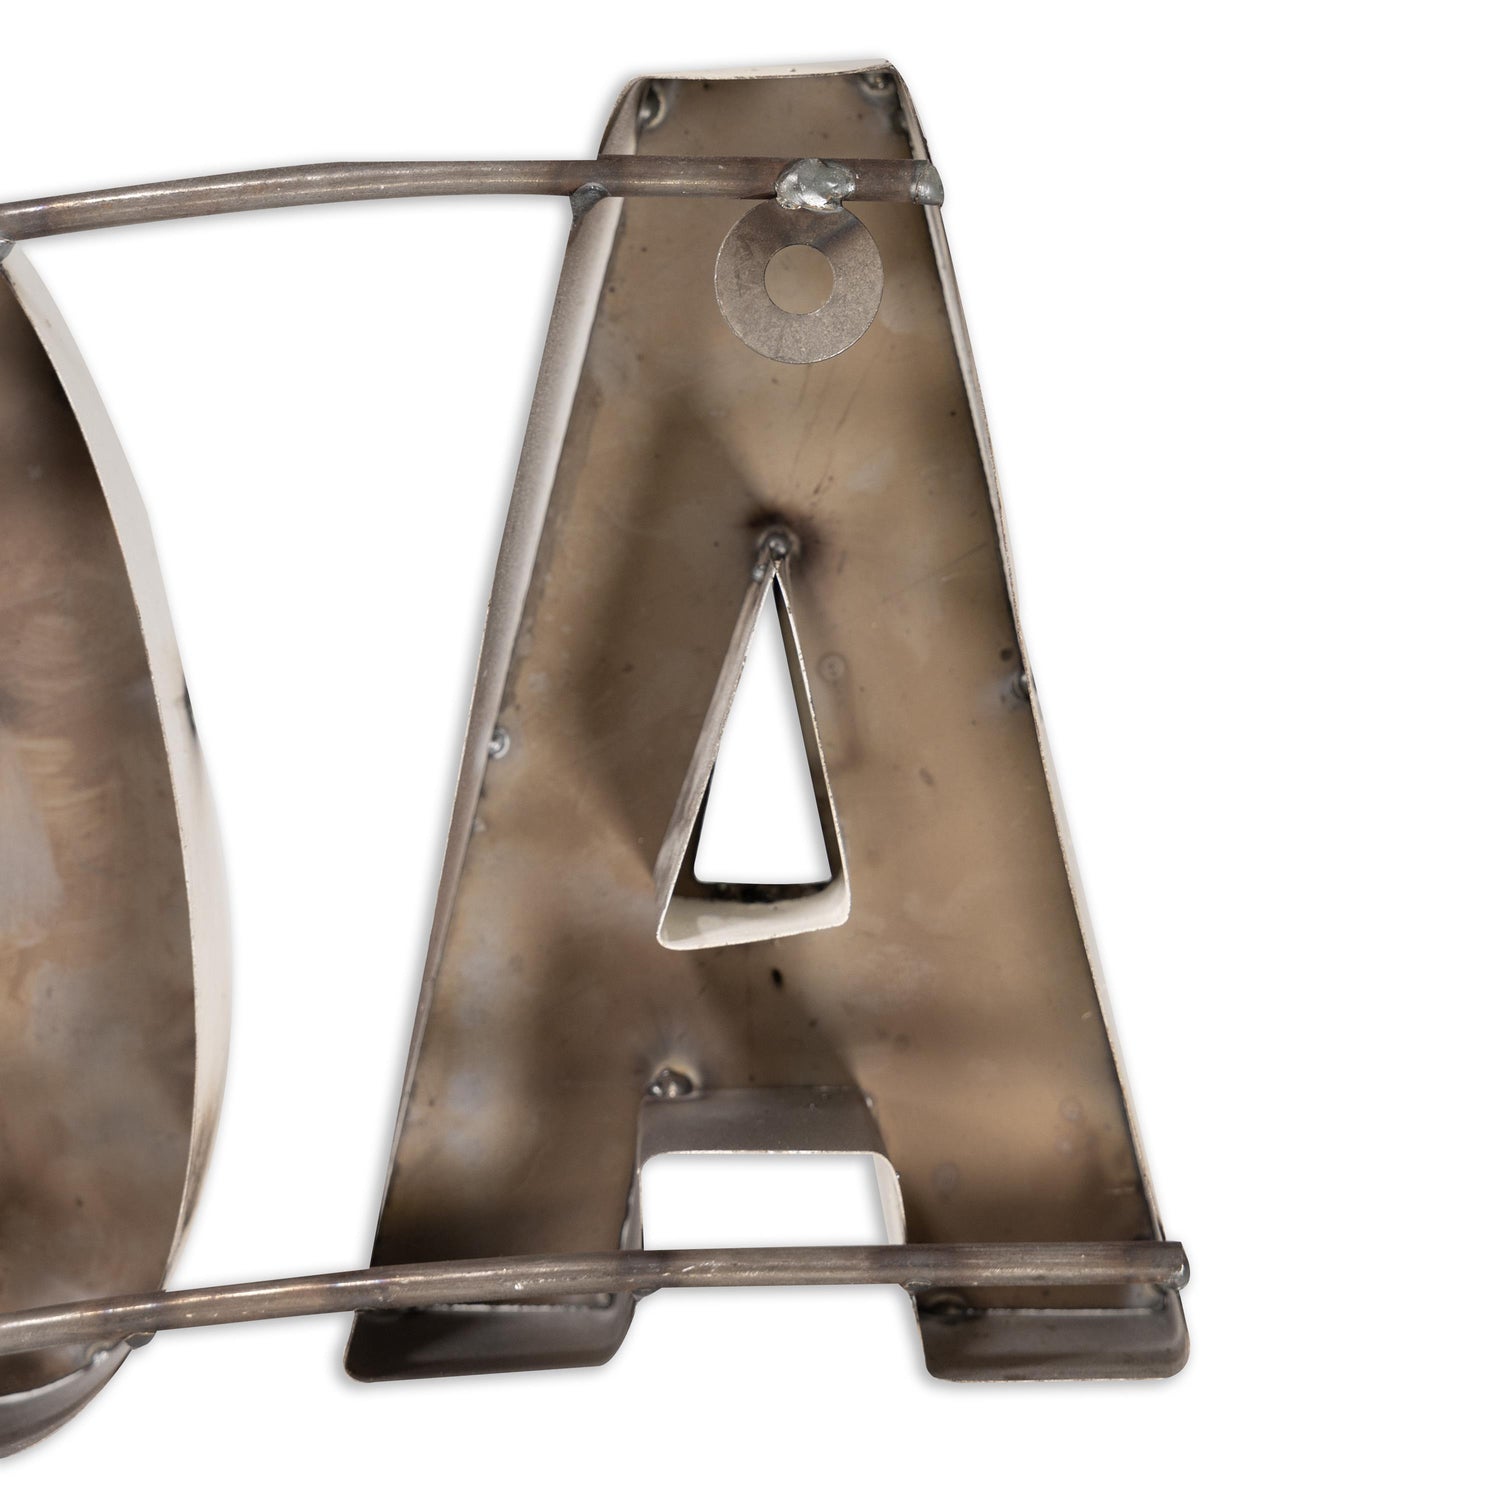 Texas A&M Aggies Arched Wall Sign